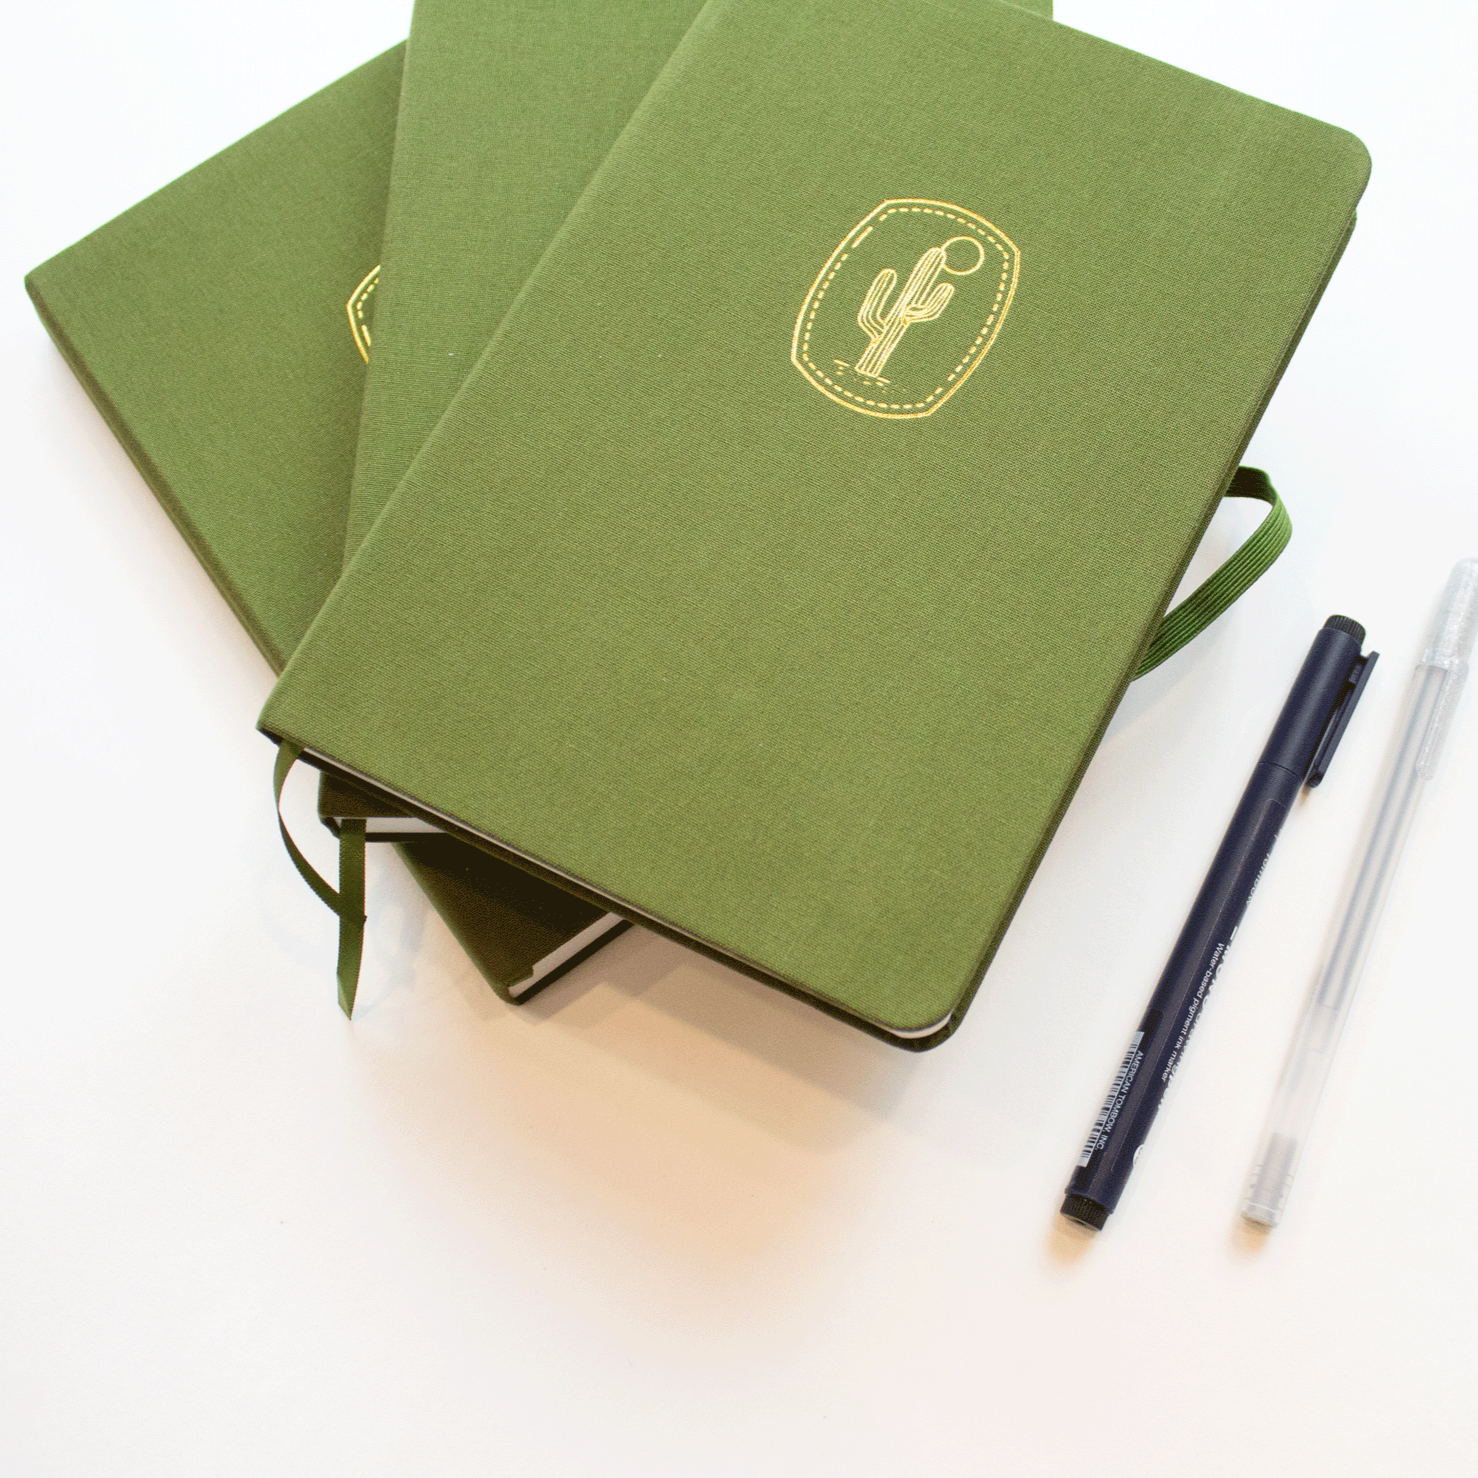 A stack of 3 cactus bobo dot grid journals and two pens. You can see the ribbon bookmarks sticking out from the bottom of the journals, and the elastic closure that has been pulled open.